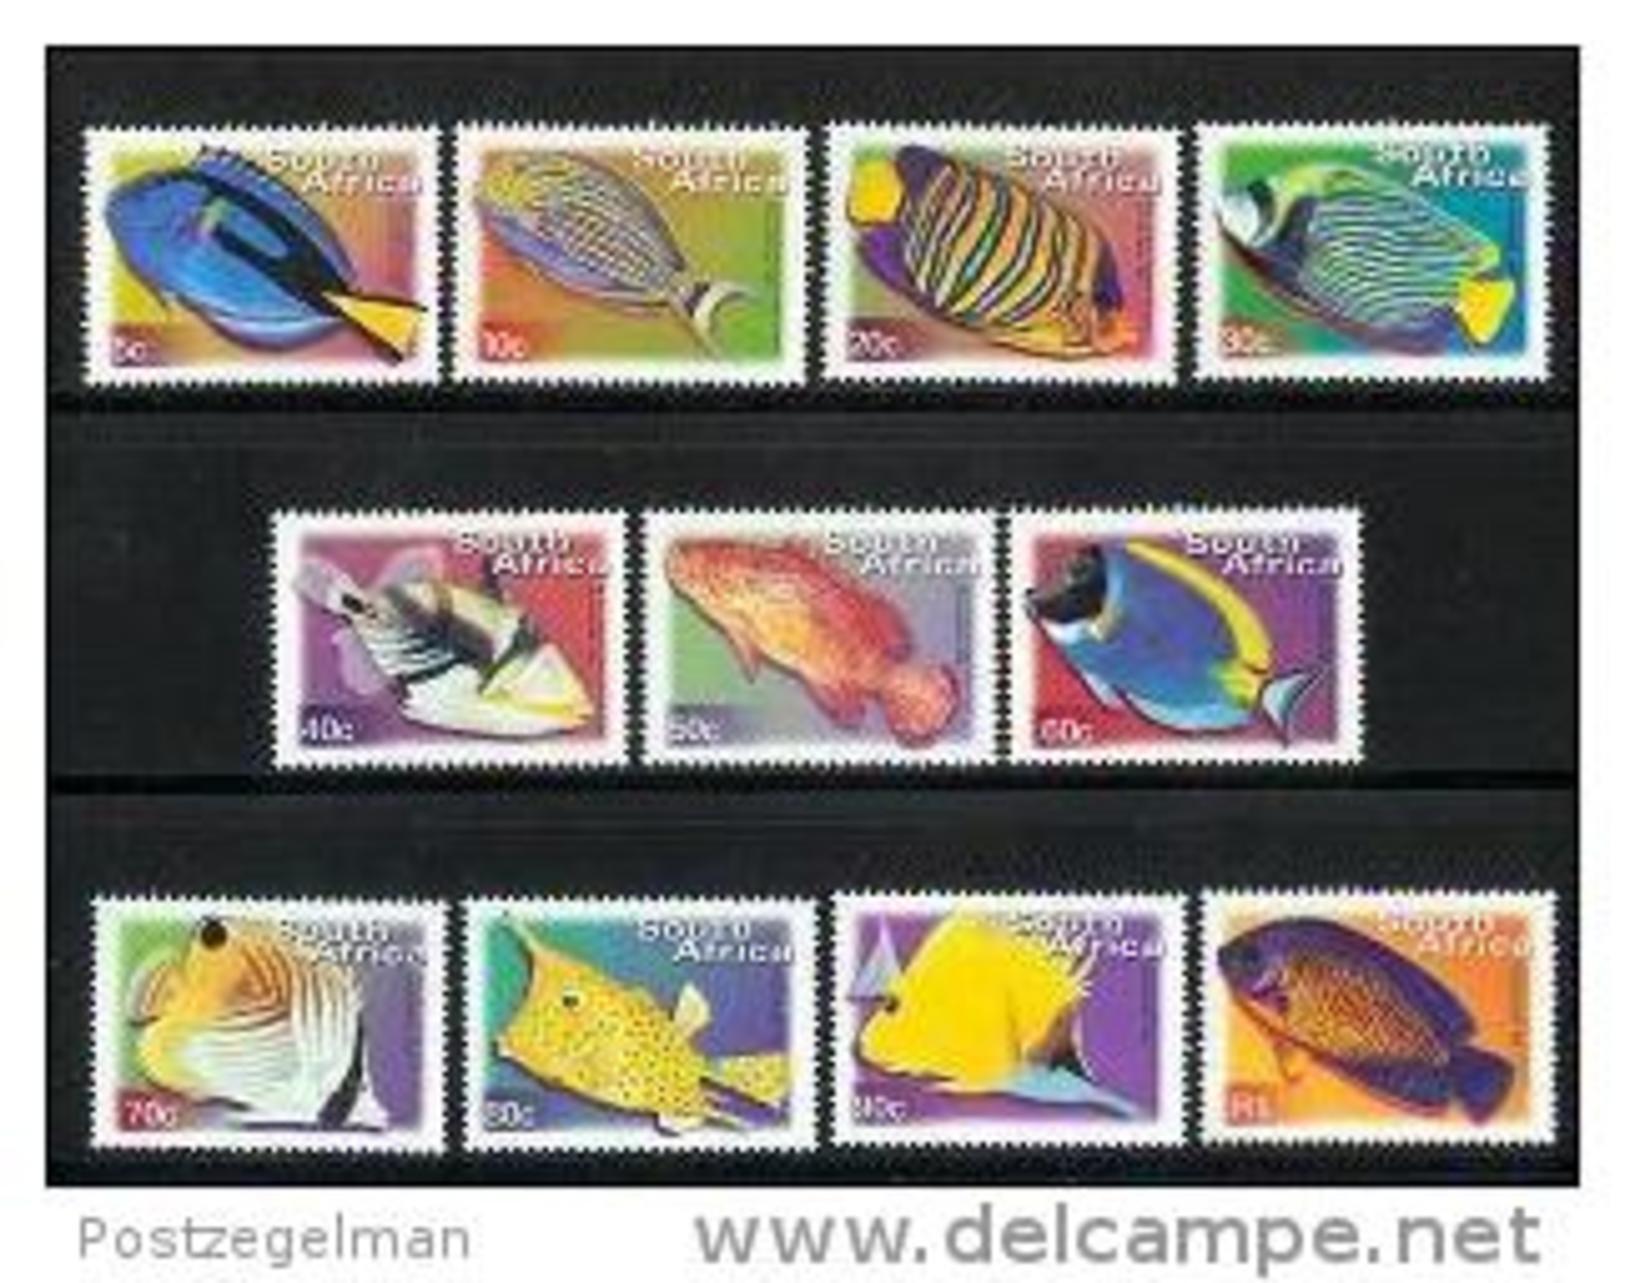 SOUTH AFRICA, 2001, Mint Never Hinged Stamp(s), Definitives Fishes (11 Stamps), Nr(s) 1285-1295 #6756-8 - Ongebruikt